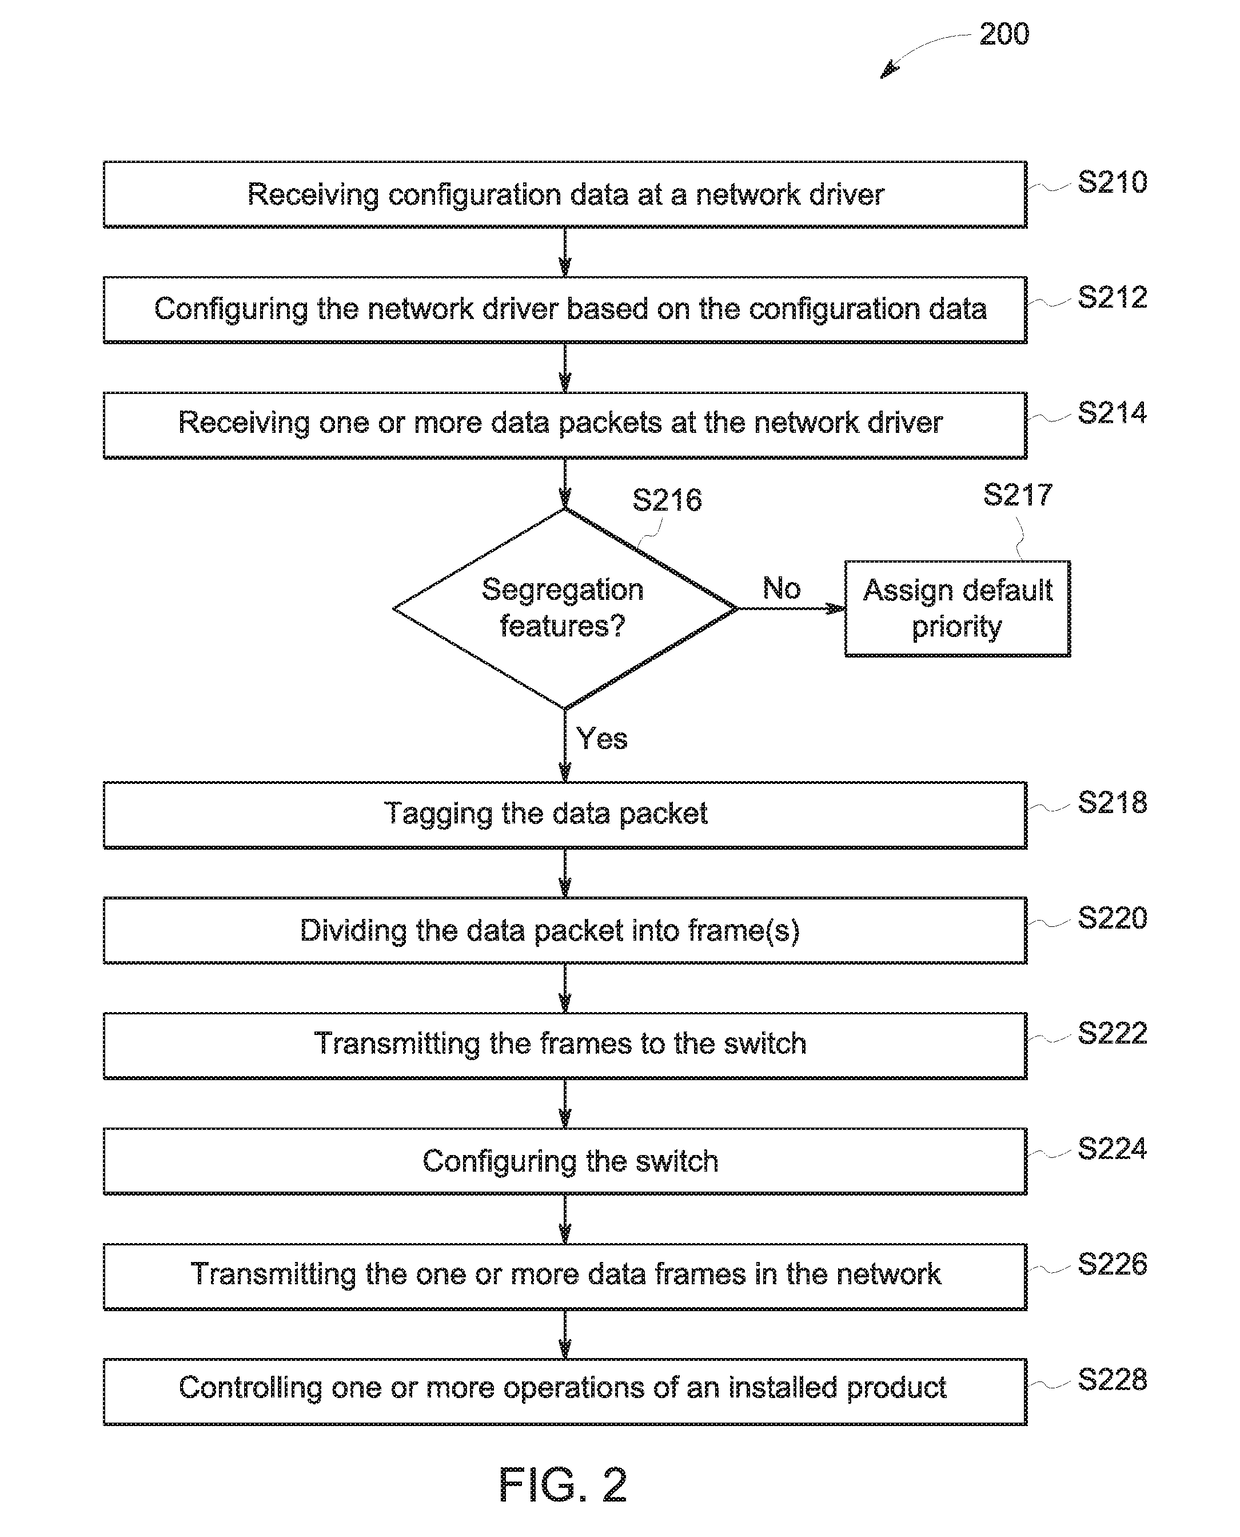 Resilient network configuration for time sensitive traffic